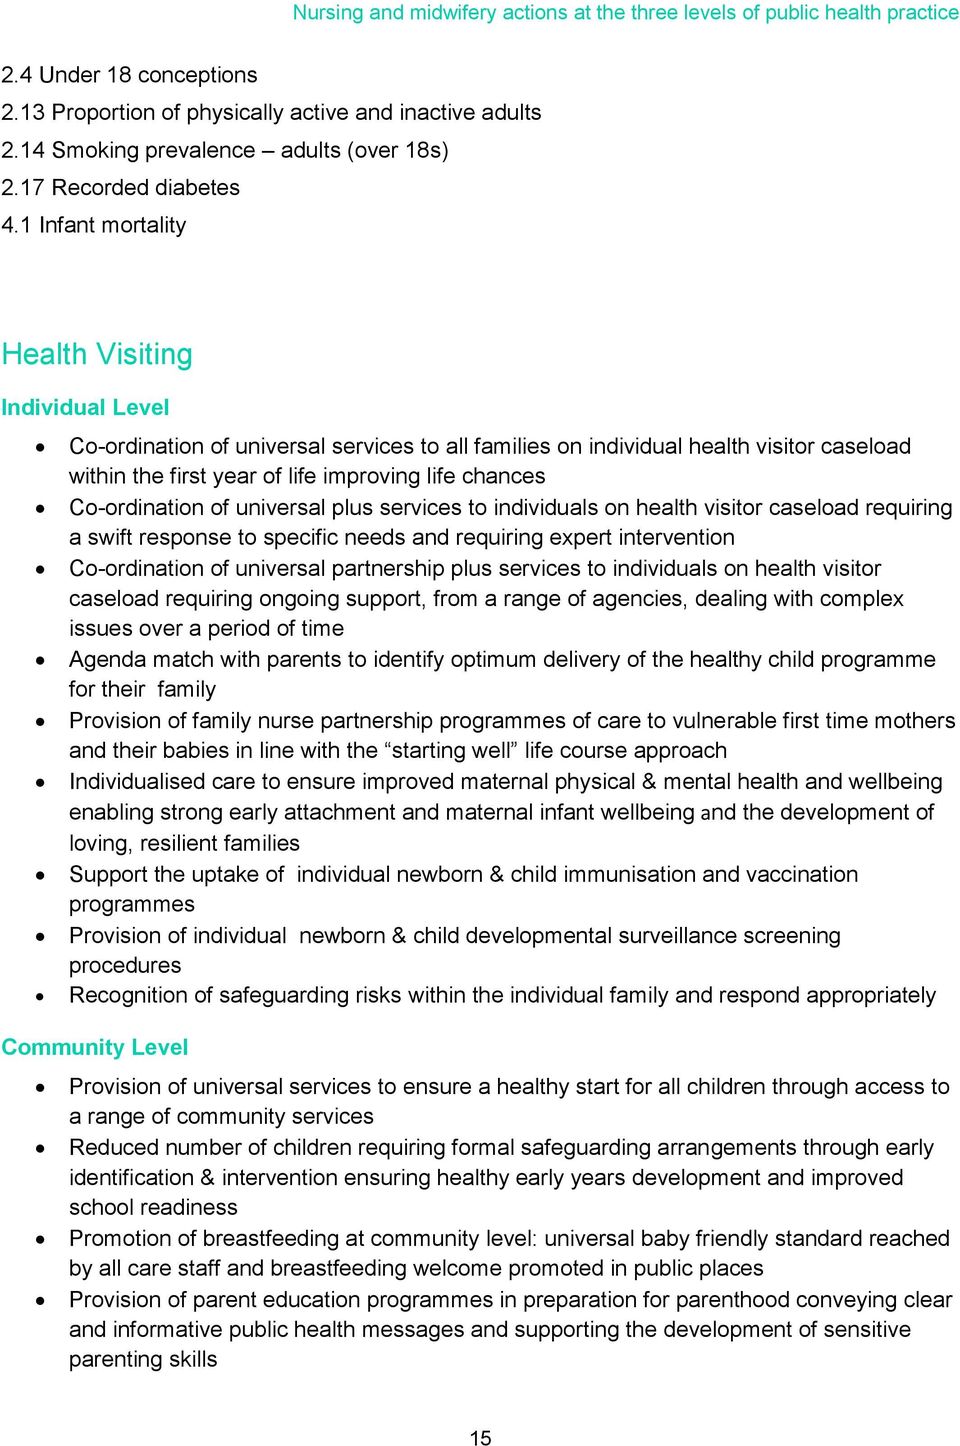 1 Infant mortality Health Visiting Co-ordination of universal services to all families on individual health visitor caseload within the first year of life improving life chances Co-ordination of